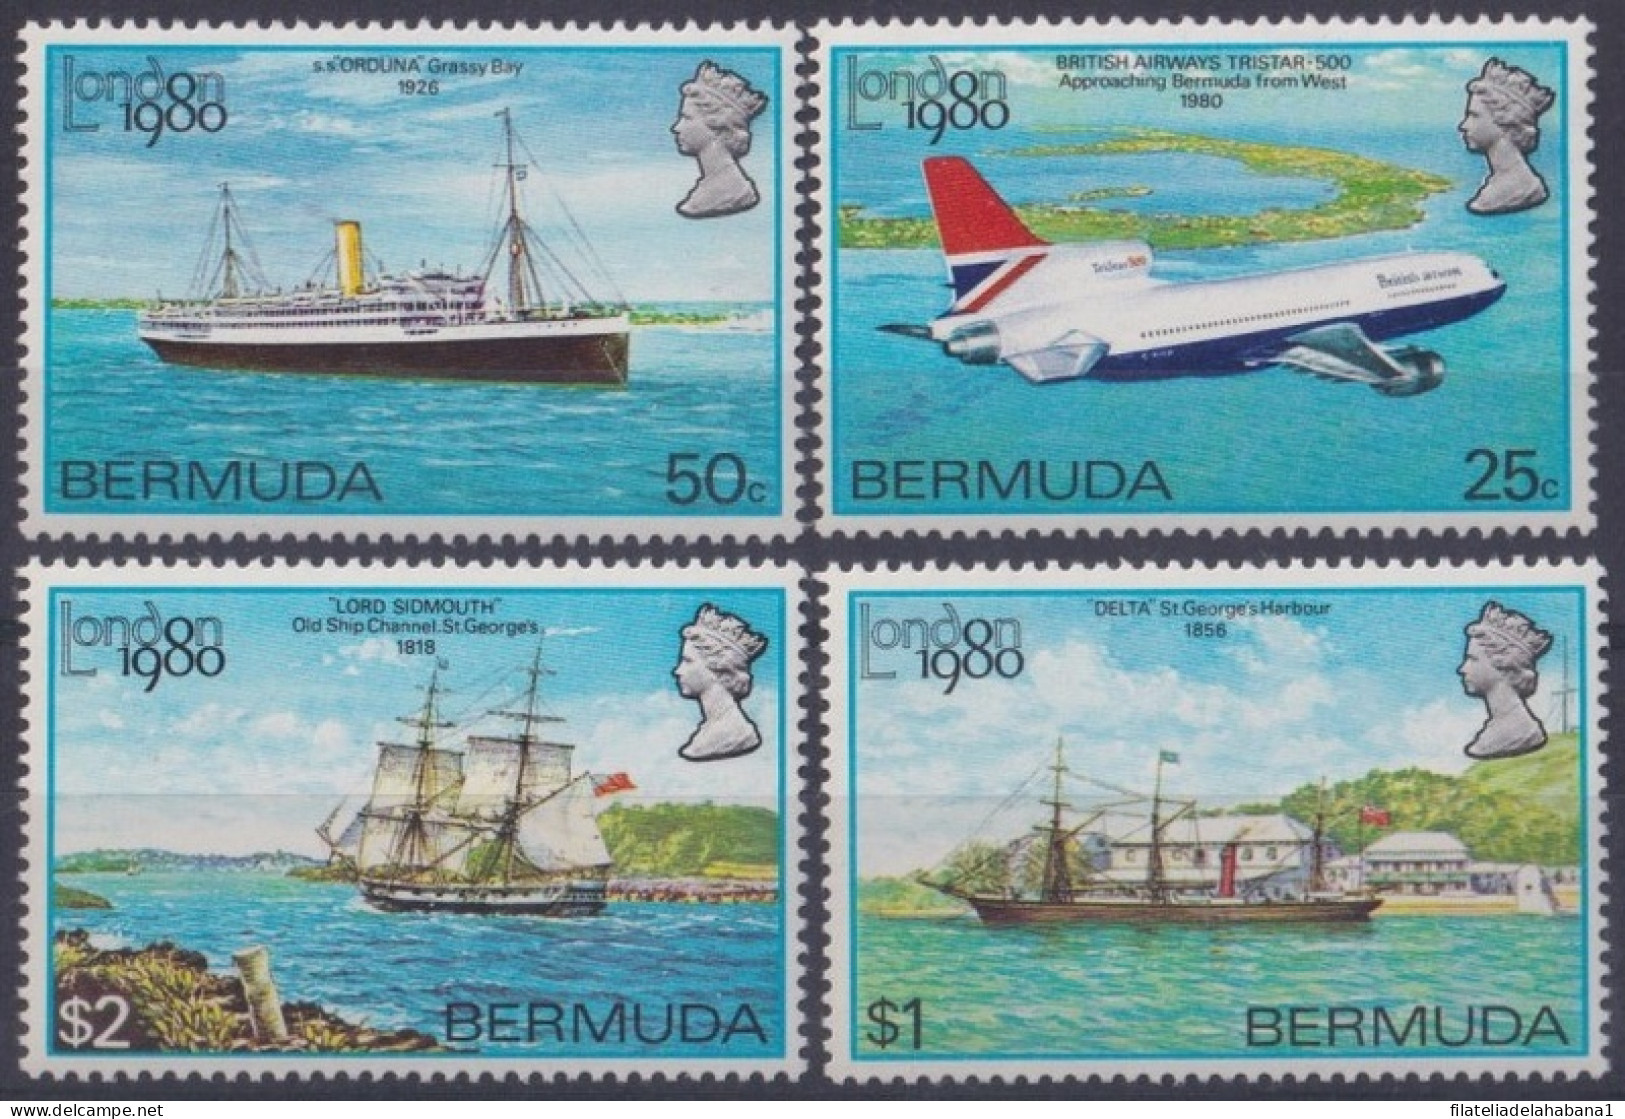 F-EX49865 BERMUDA IS MNH 1980 LONDON EXPO AIRPLANE SHIP BARCOS BOAT.  - Bateaux